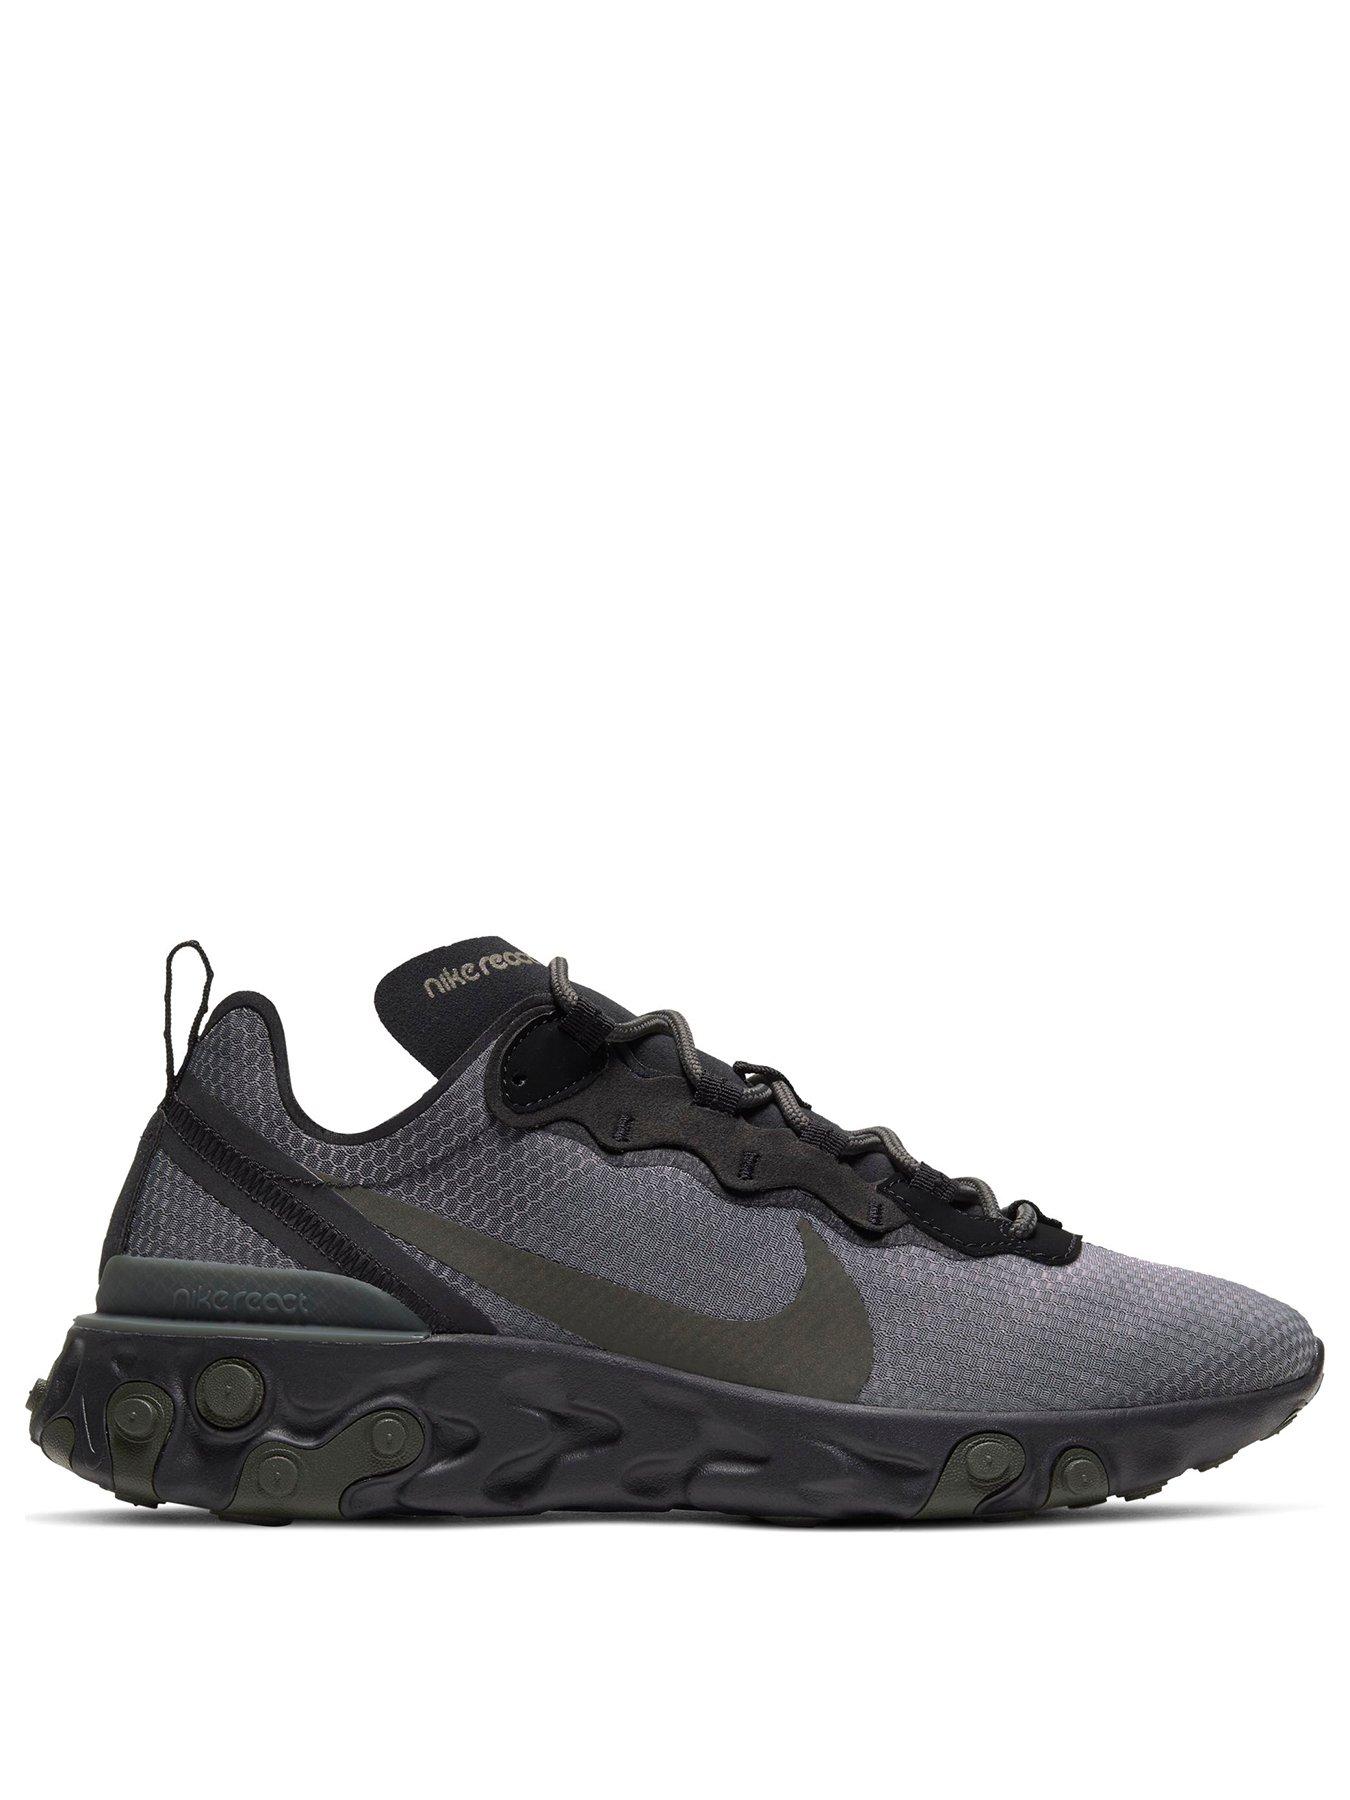 nike react element trainers mens